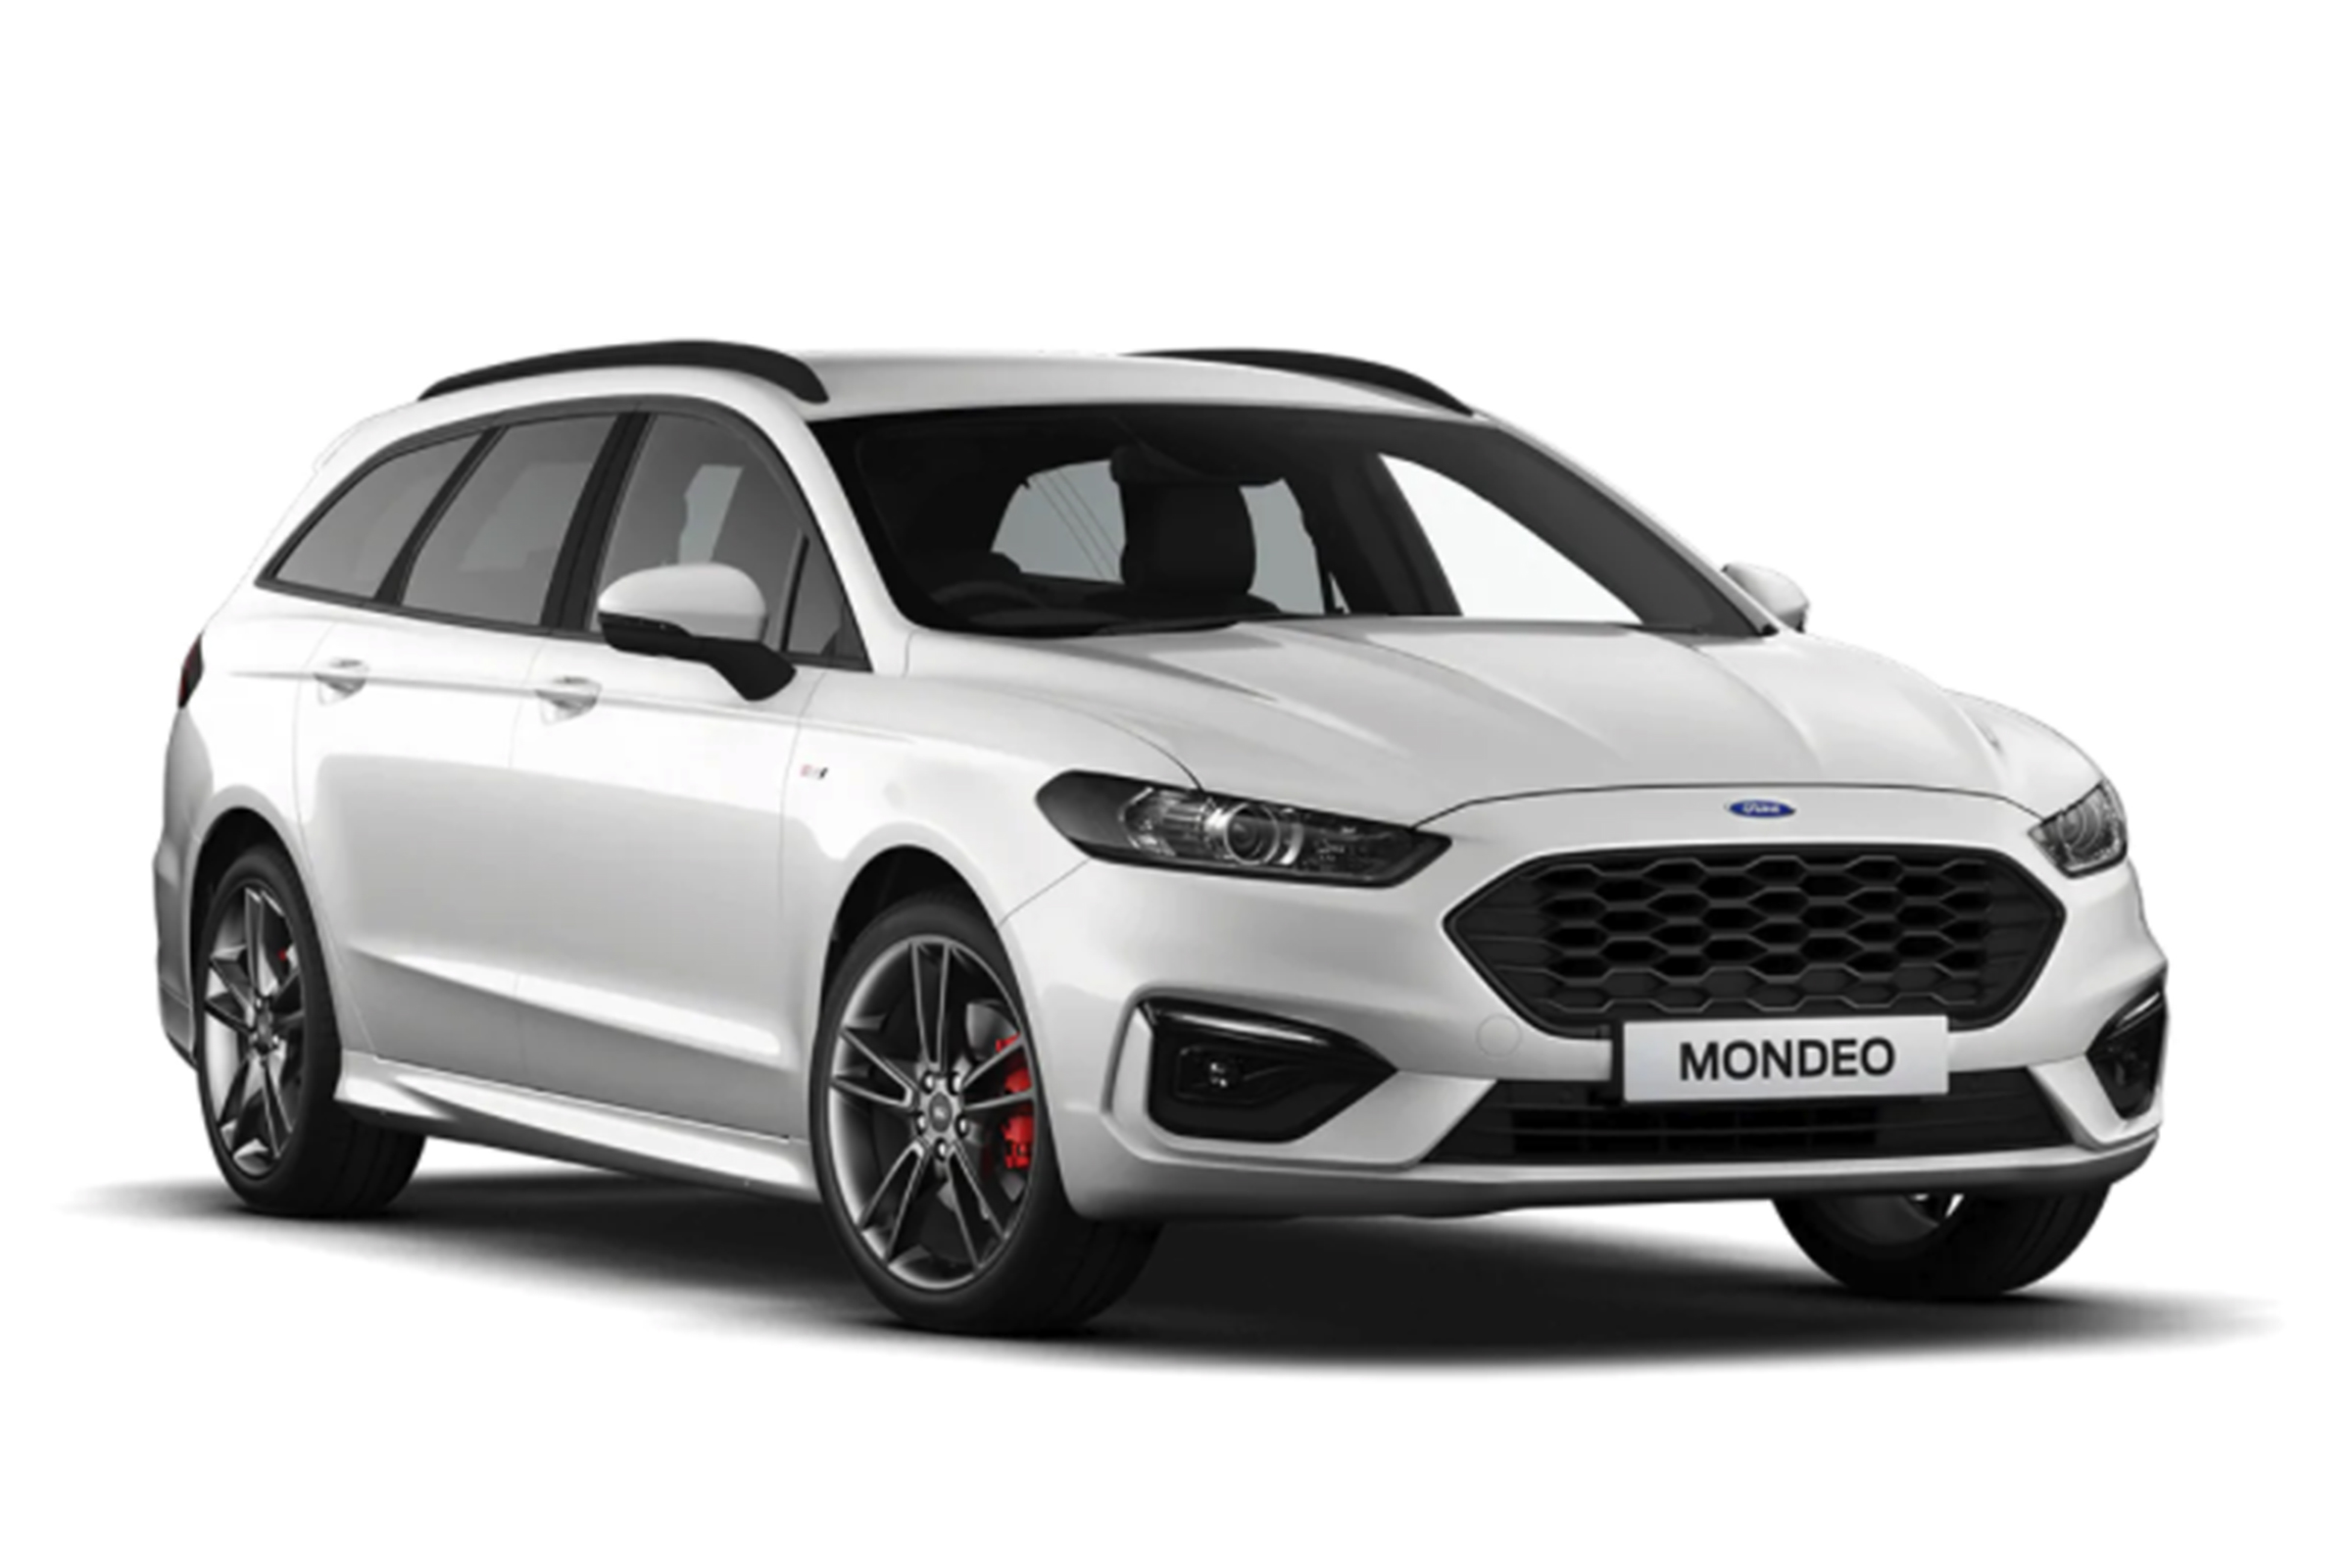 First drive: Ford Mondeo Vignale 2.0 TDCI 180PS car review